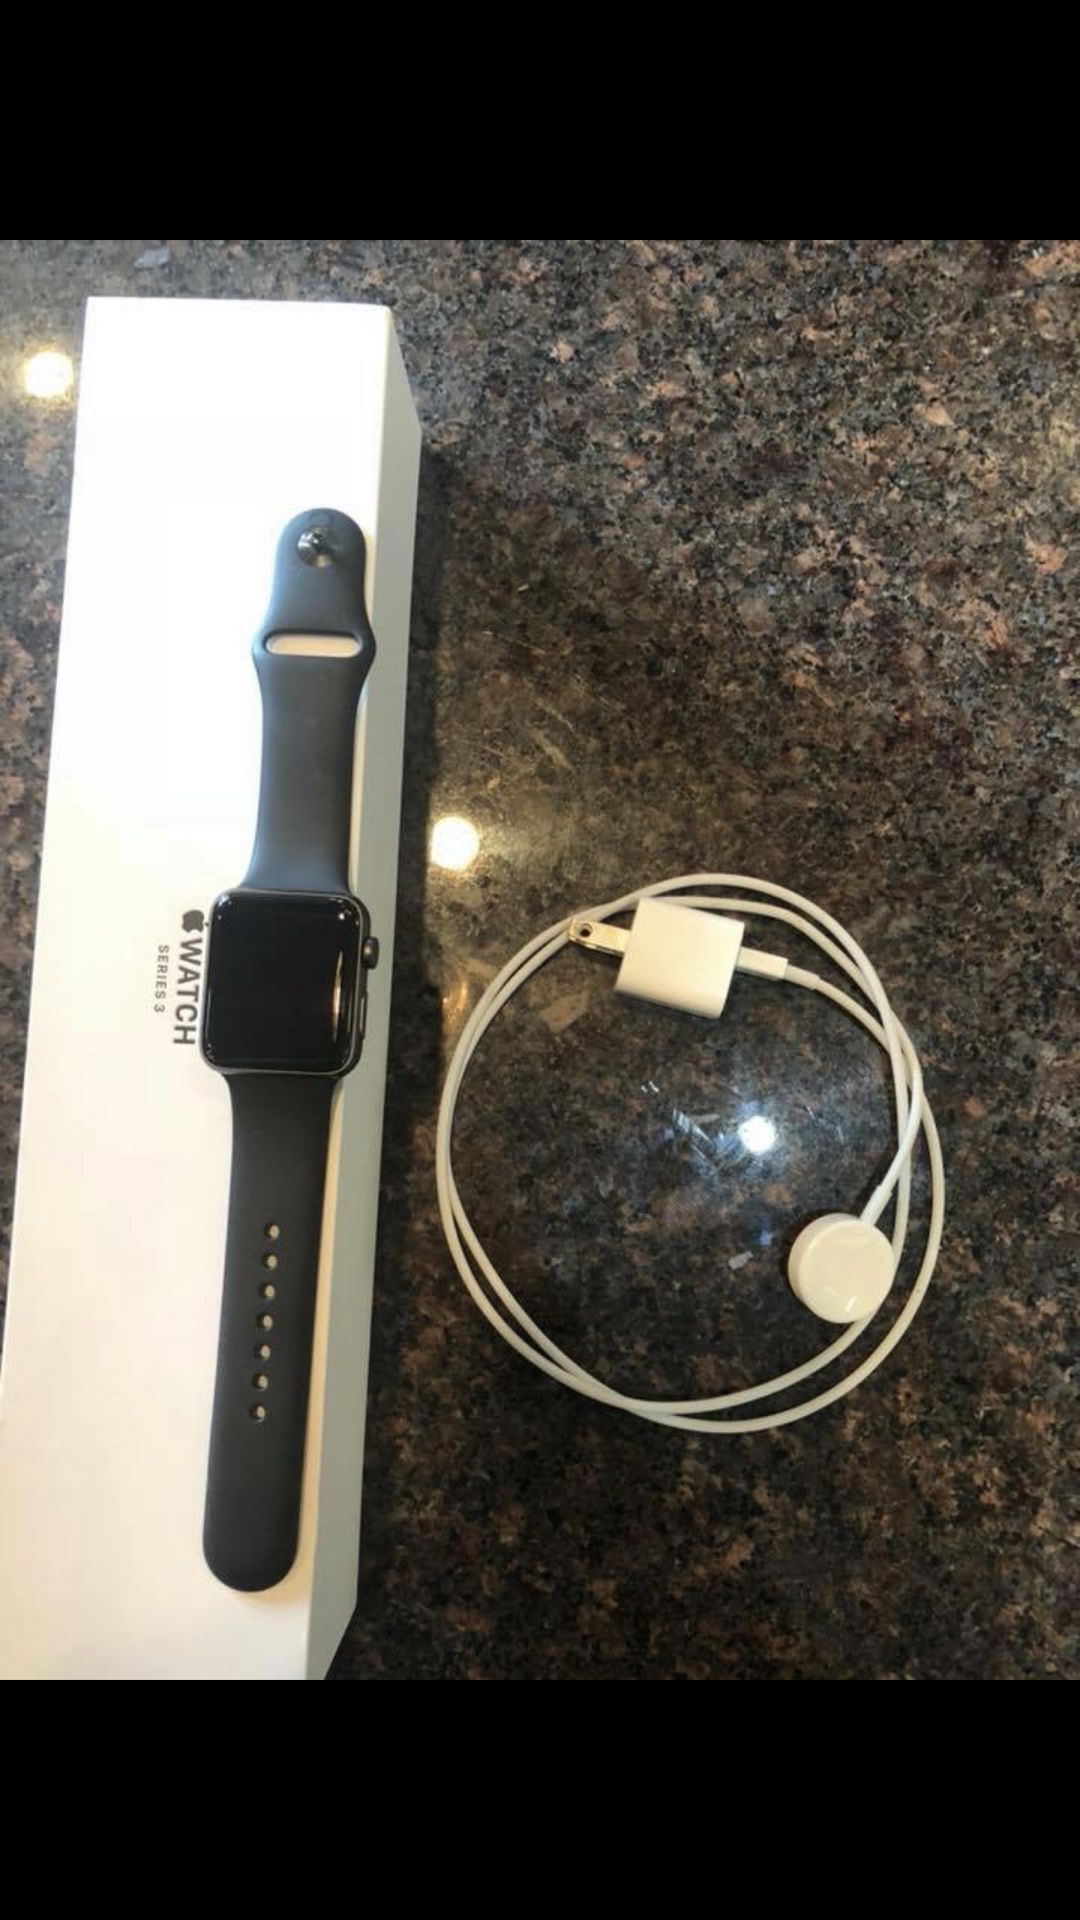 Apple Watch Series 3 42mm Space Gray (GPS only) TODAY ONLY